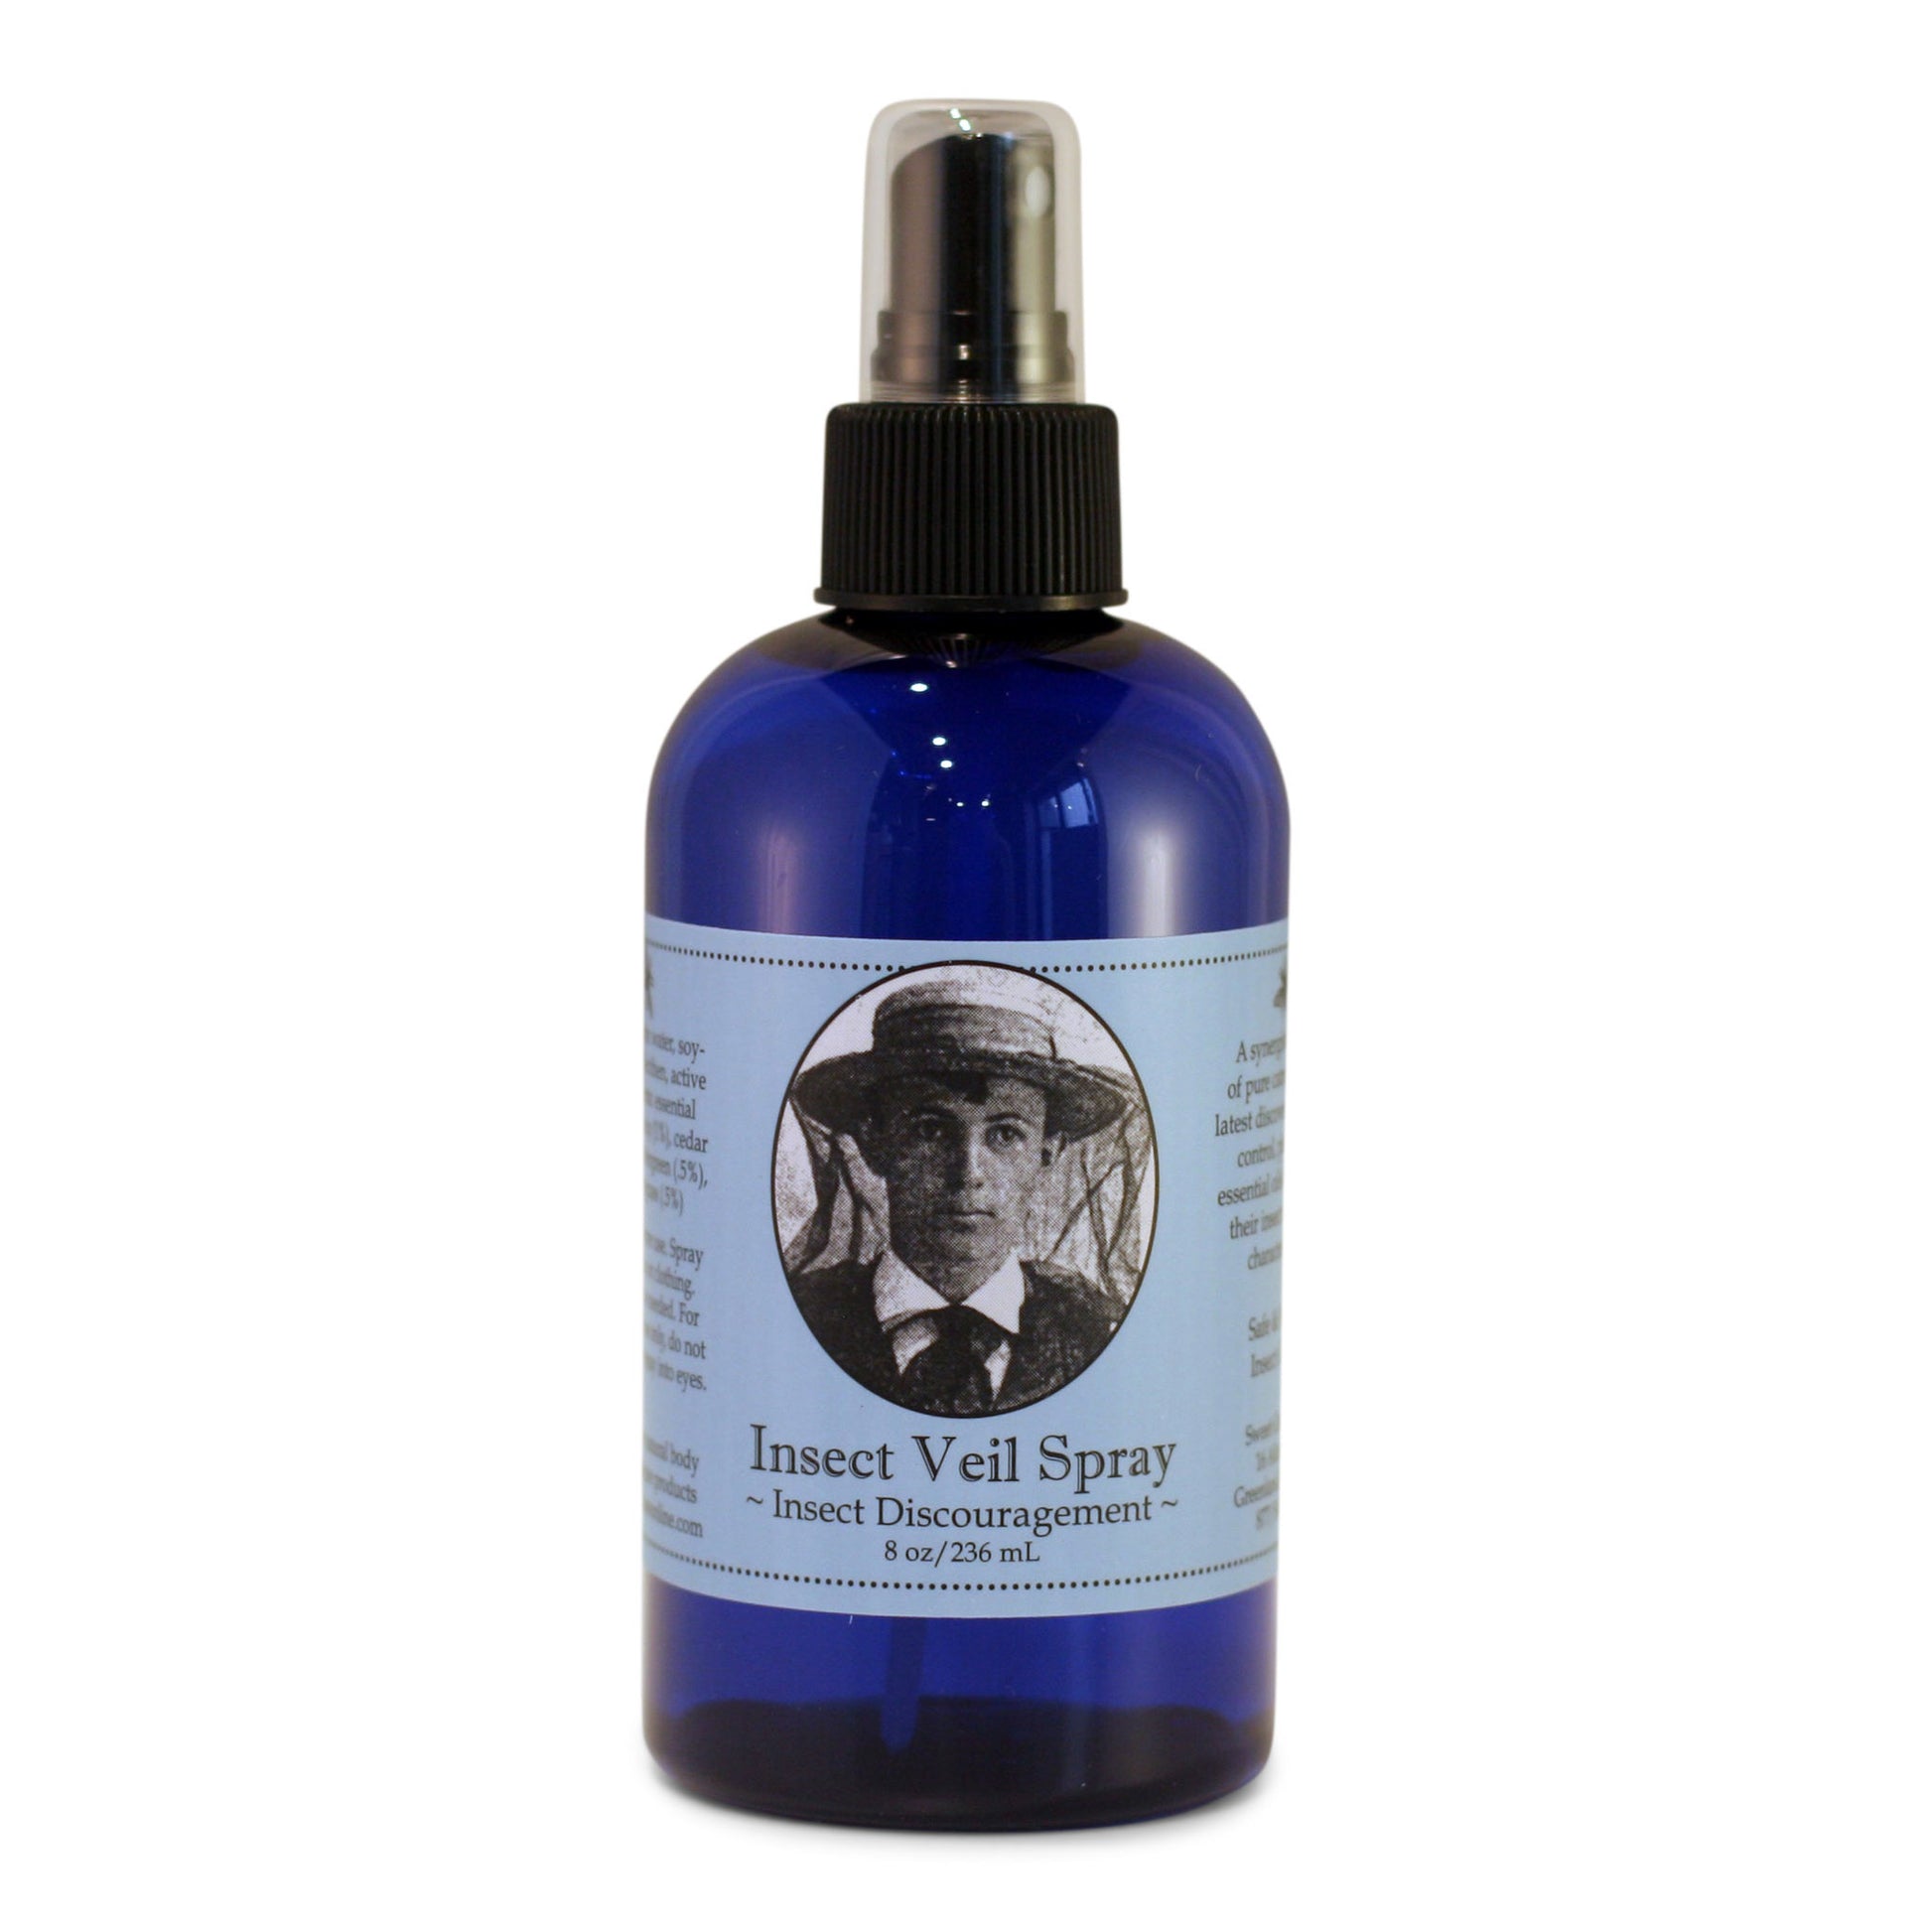 "Insect Veil" All Natural Bug Repellent Spray